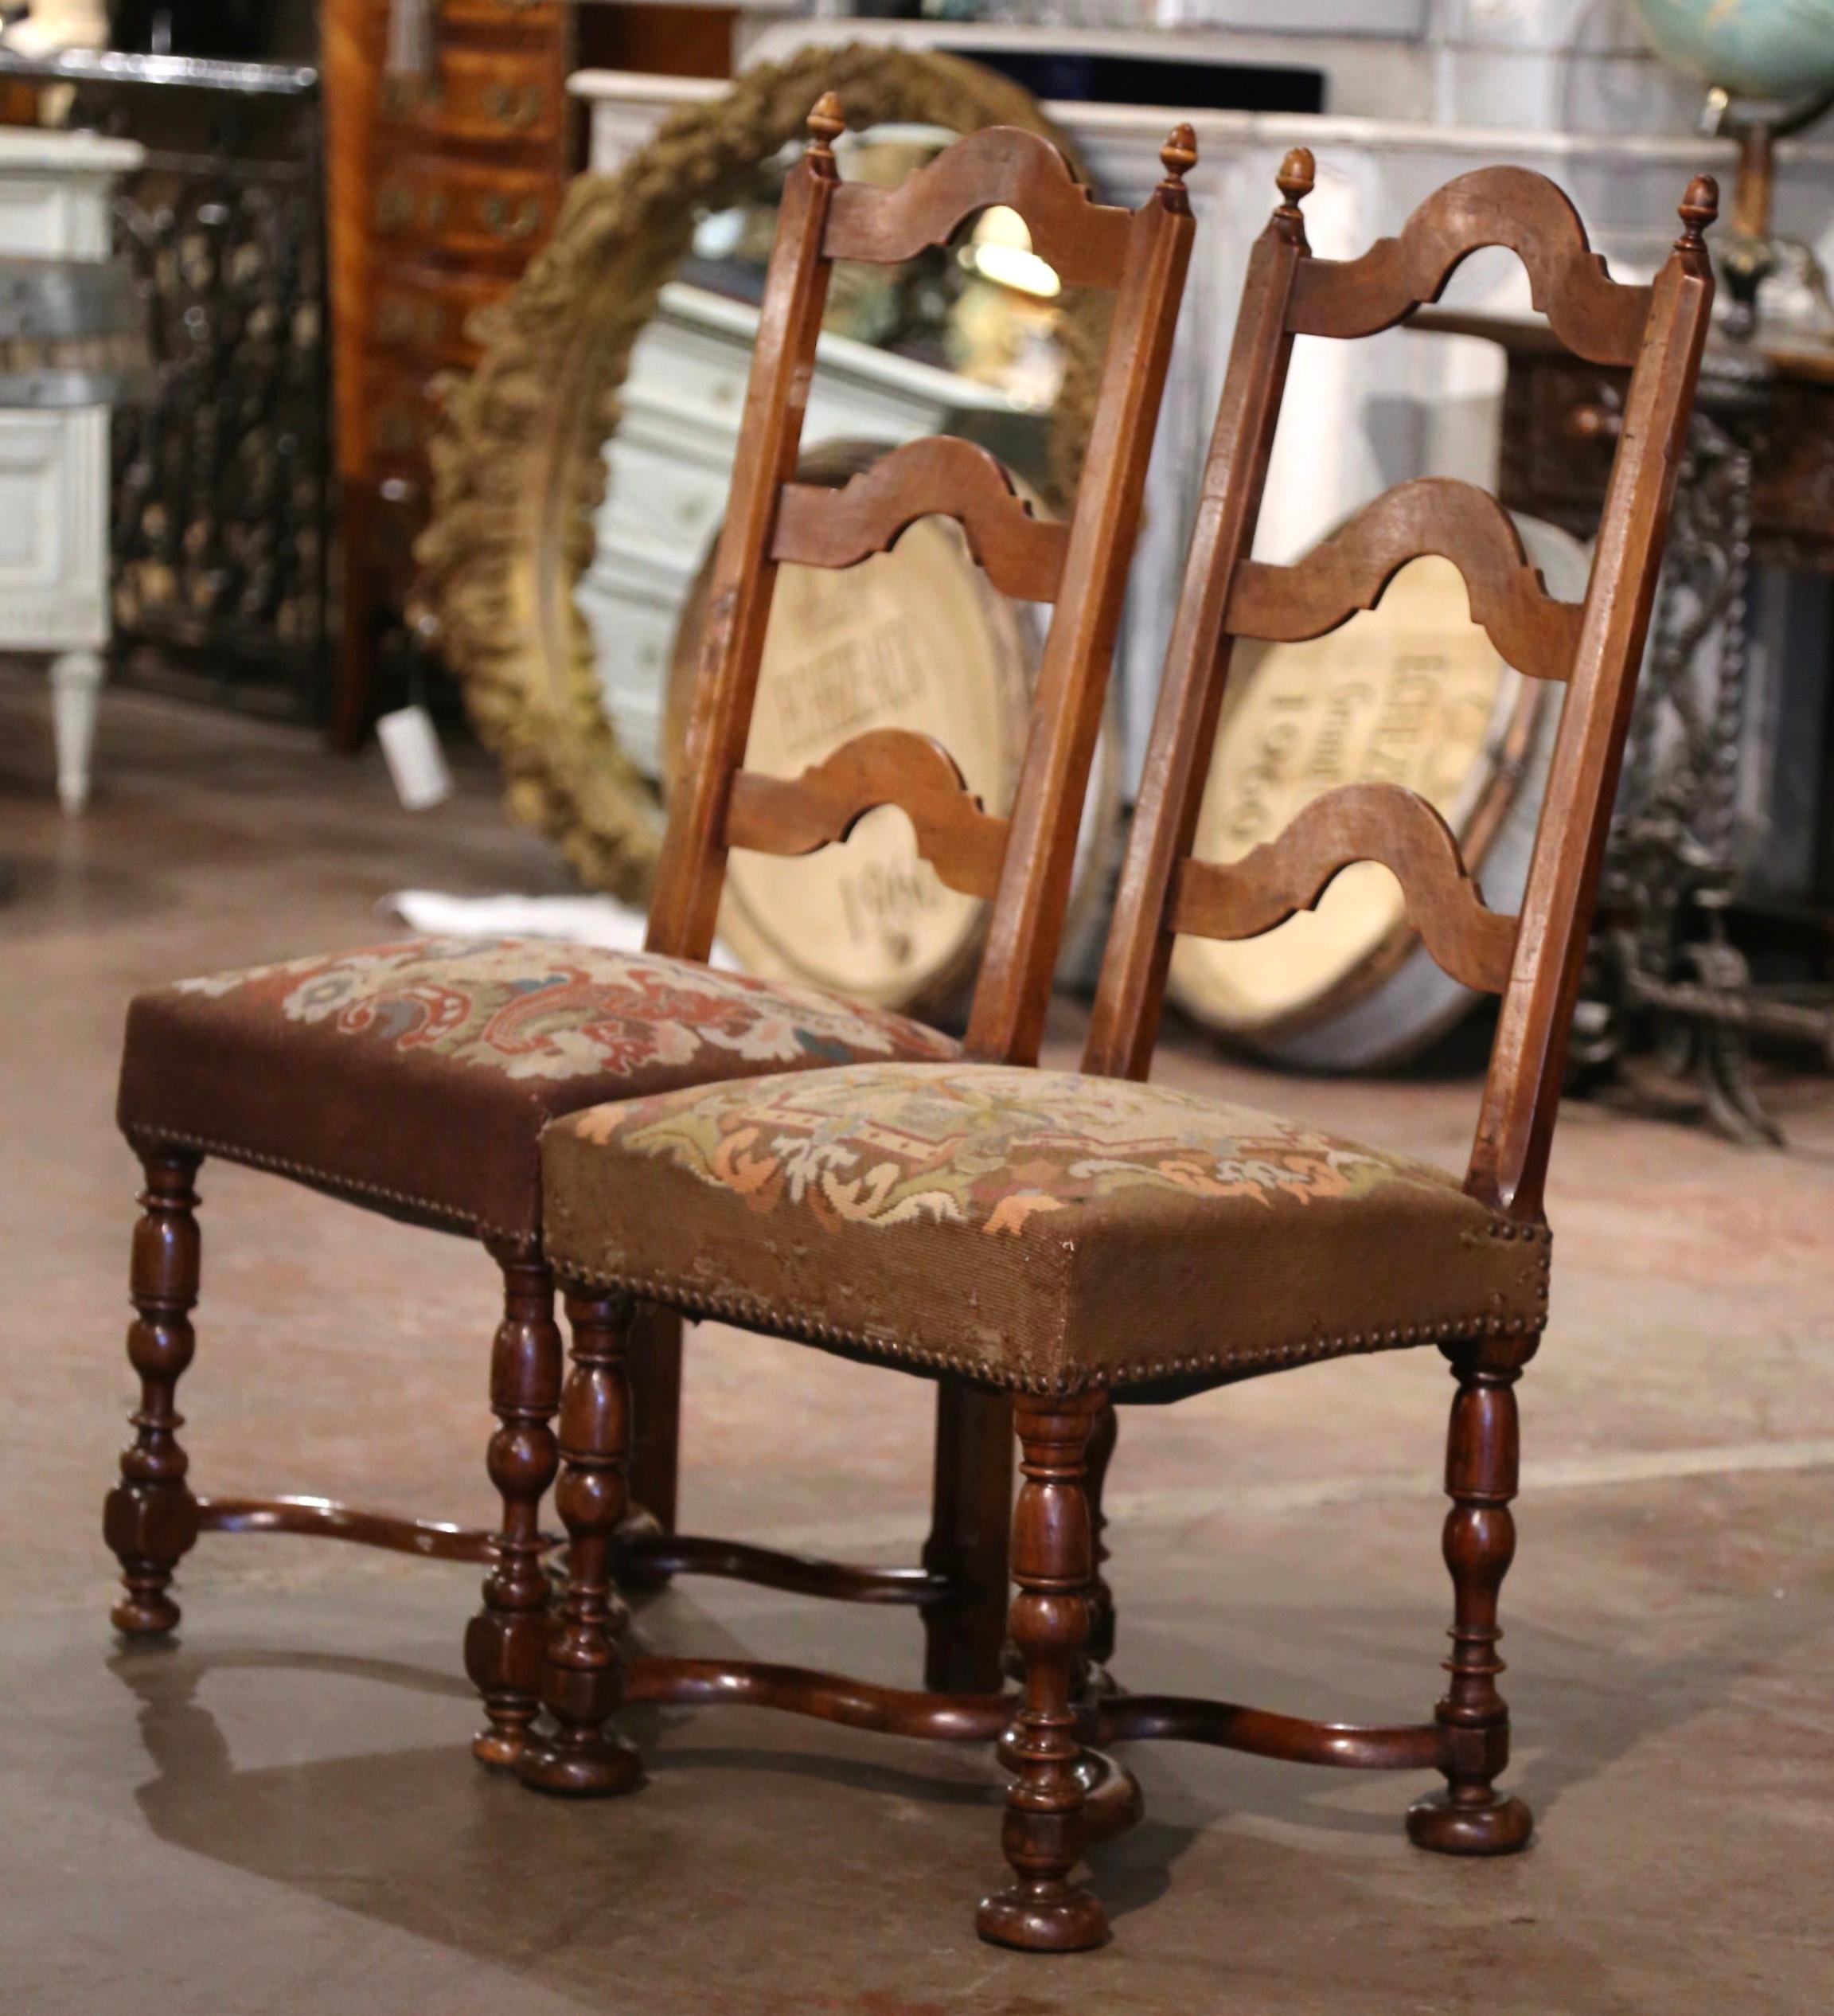 Pair of 19th Century French Carved Walnut Chairs with Needlepoint Upholstery For Sale 3